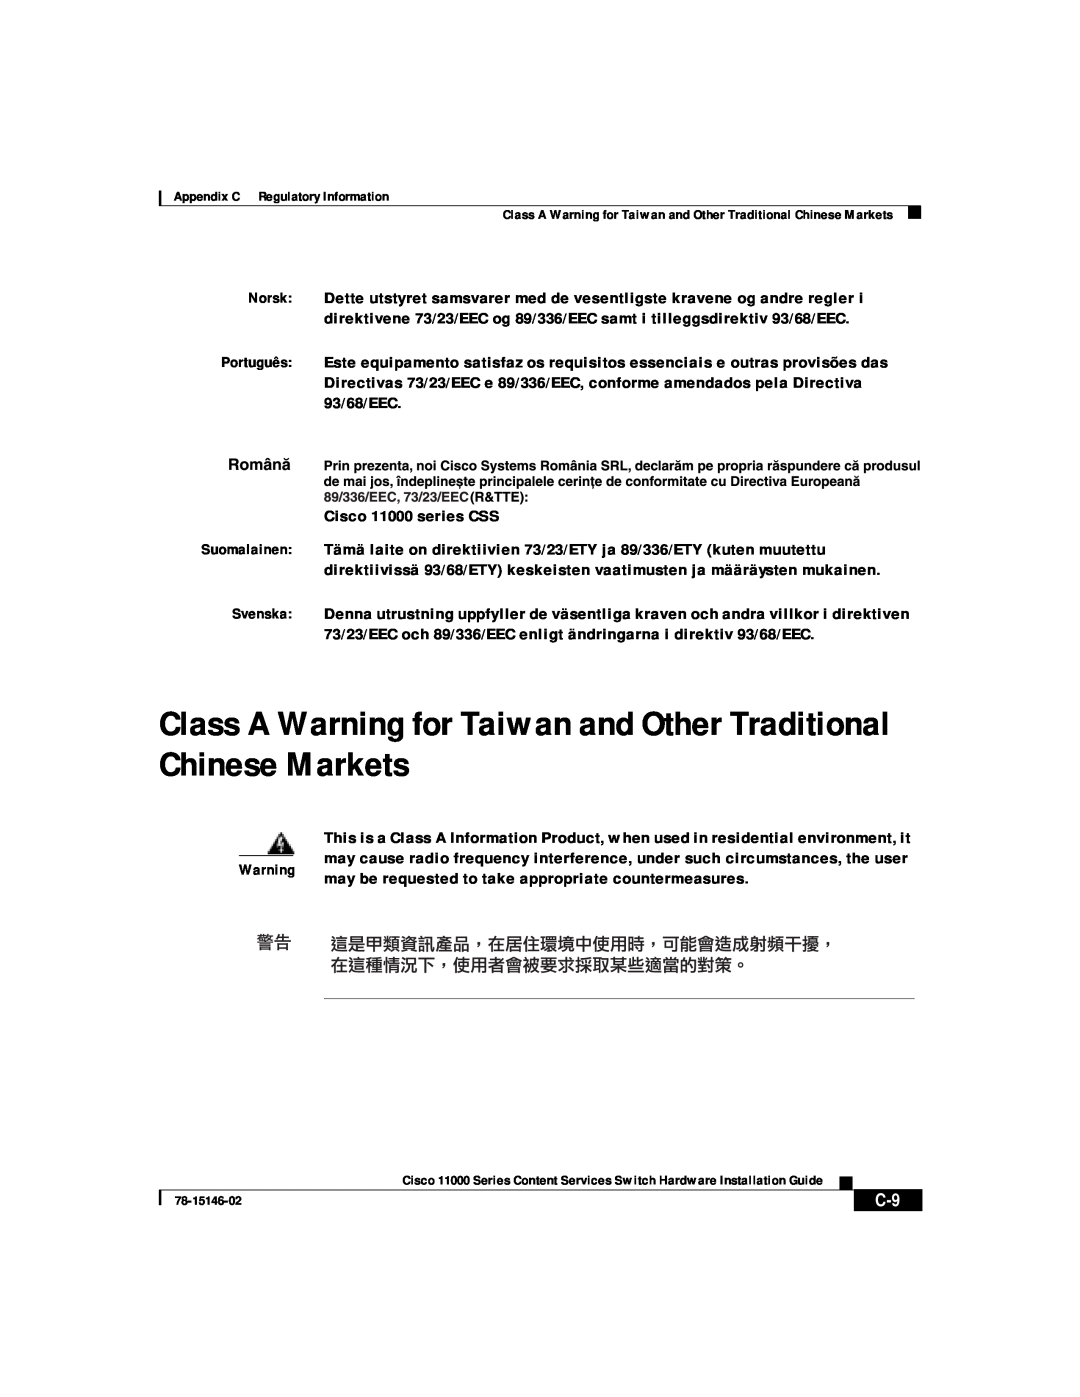 Cisco Systems 11000 Series manual Class A Warning for Taiwan and Other Traditional Chinese Markets 